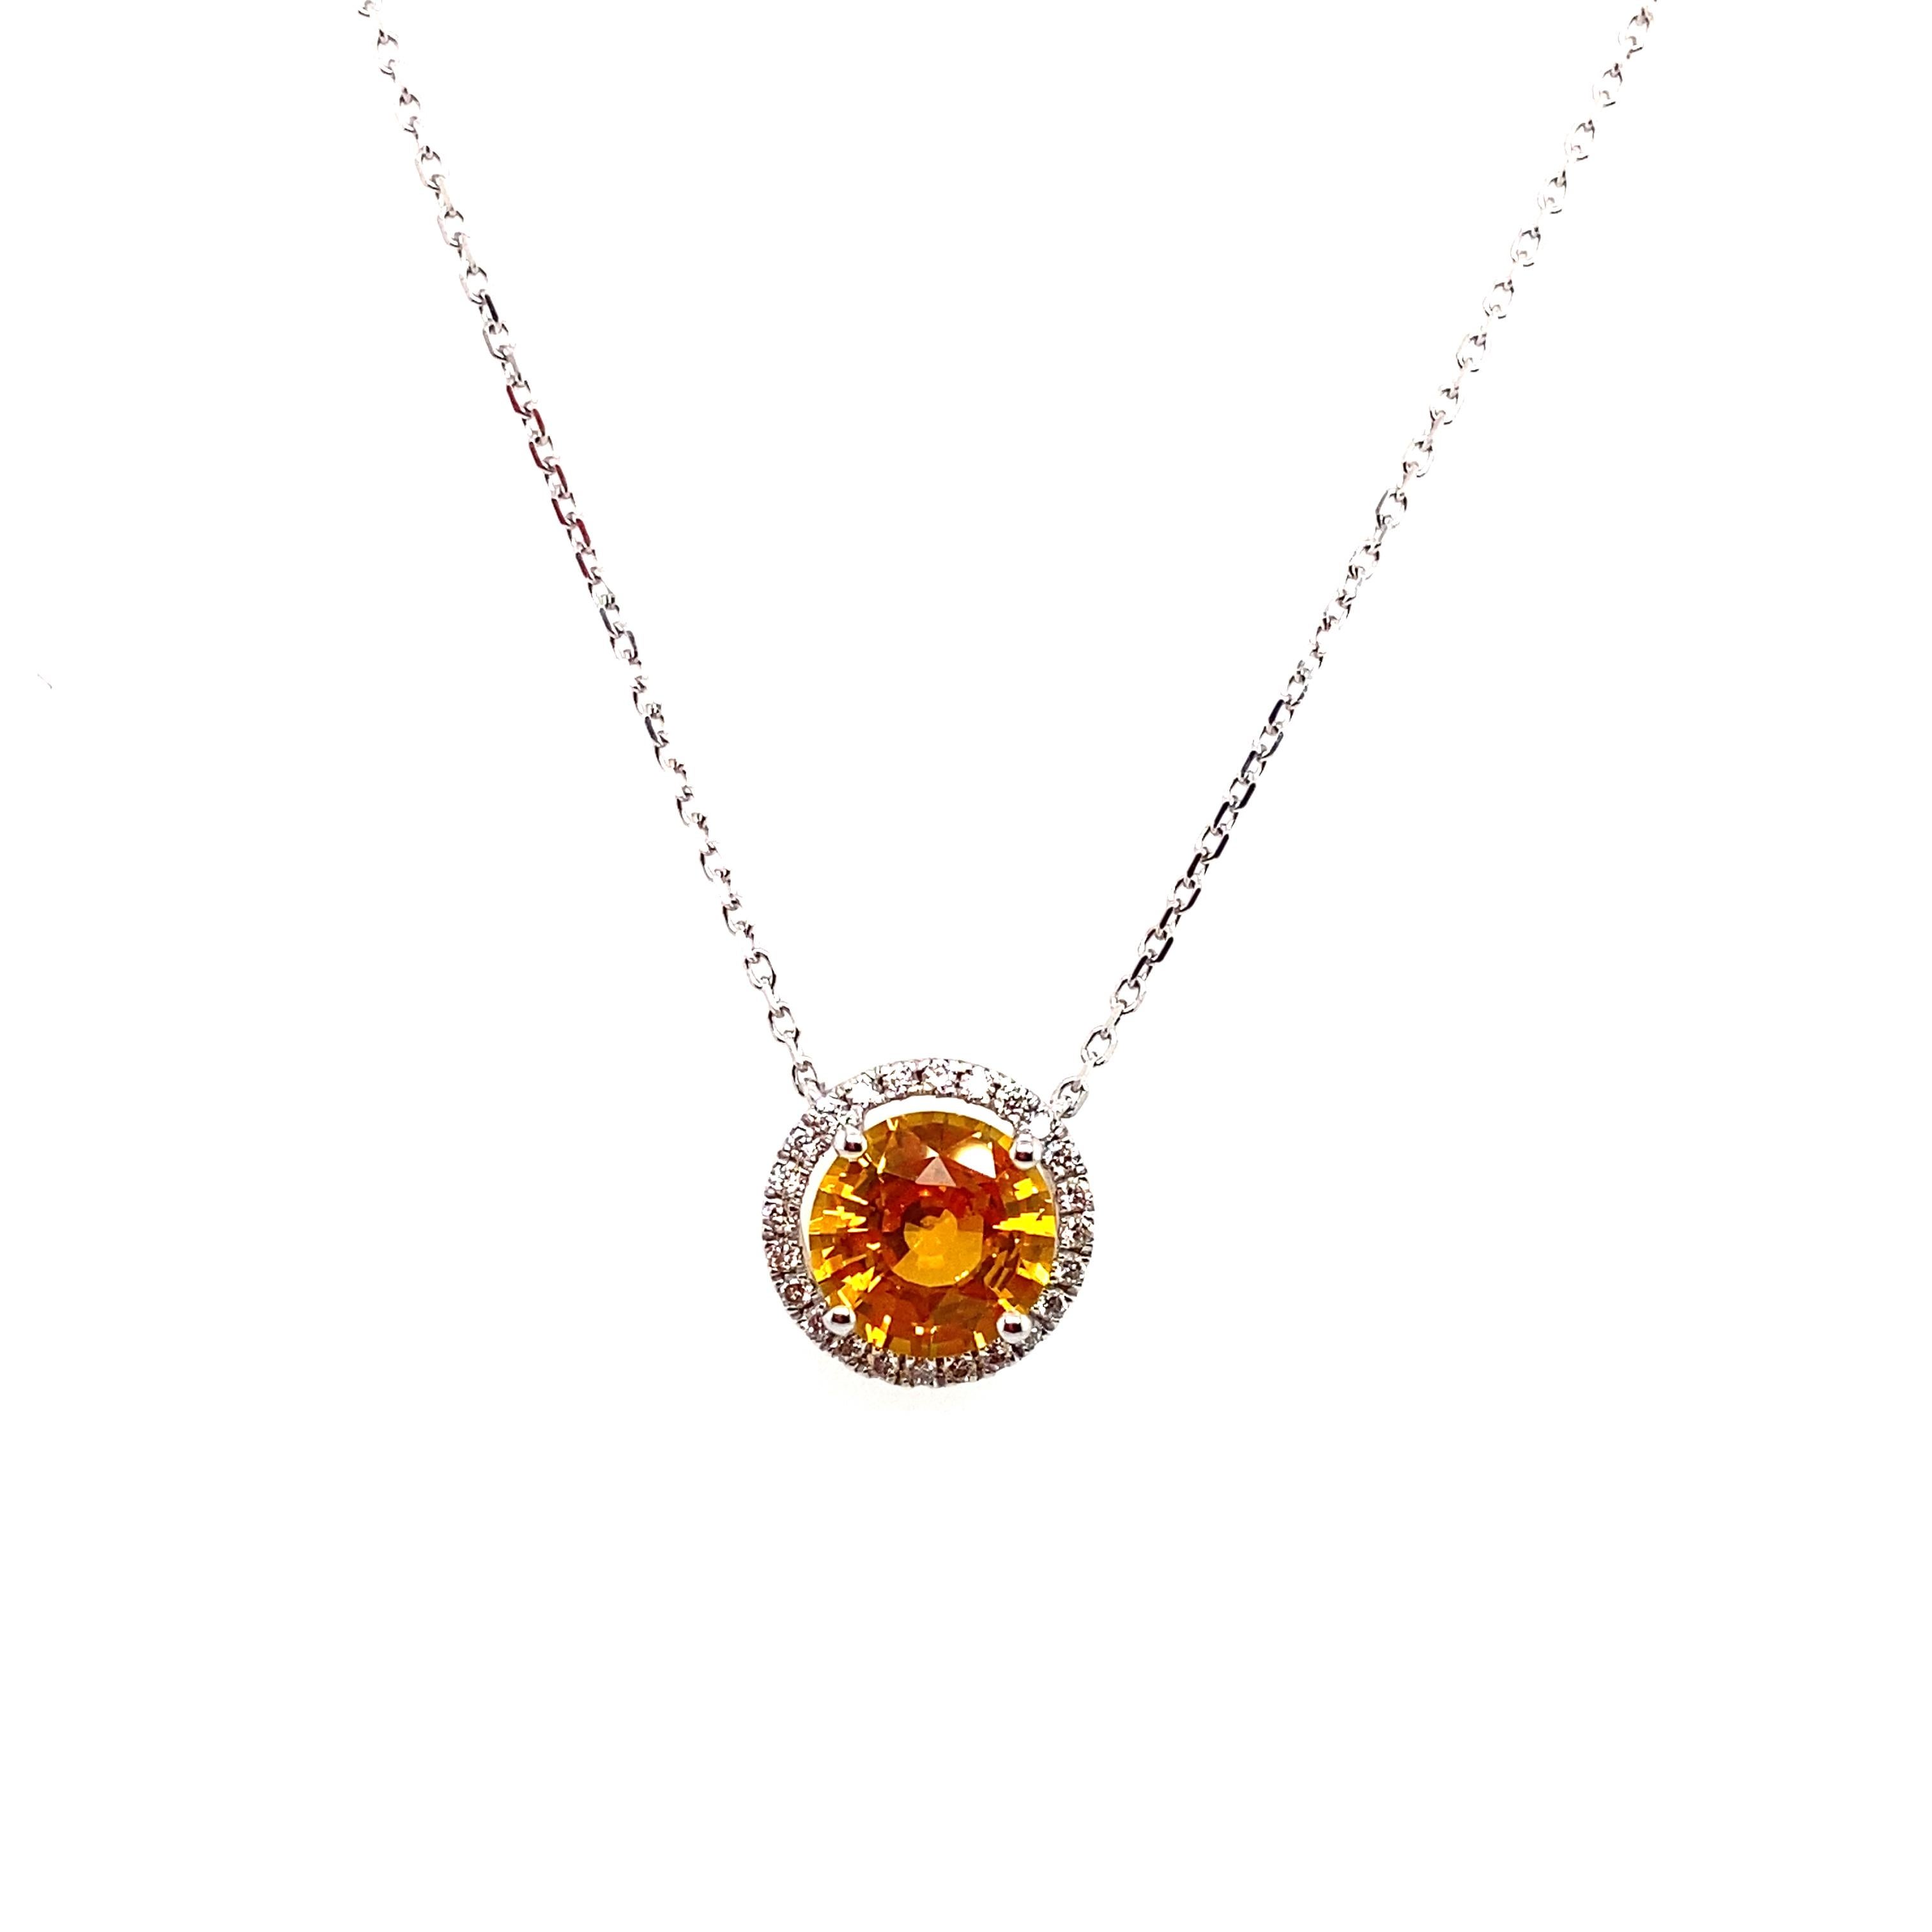 2.11 Carat Yellow Sapphire and Diamond Pendant Necklace For Sale 1